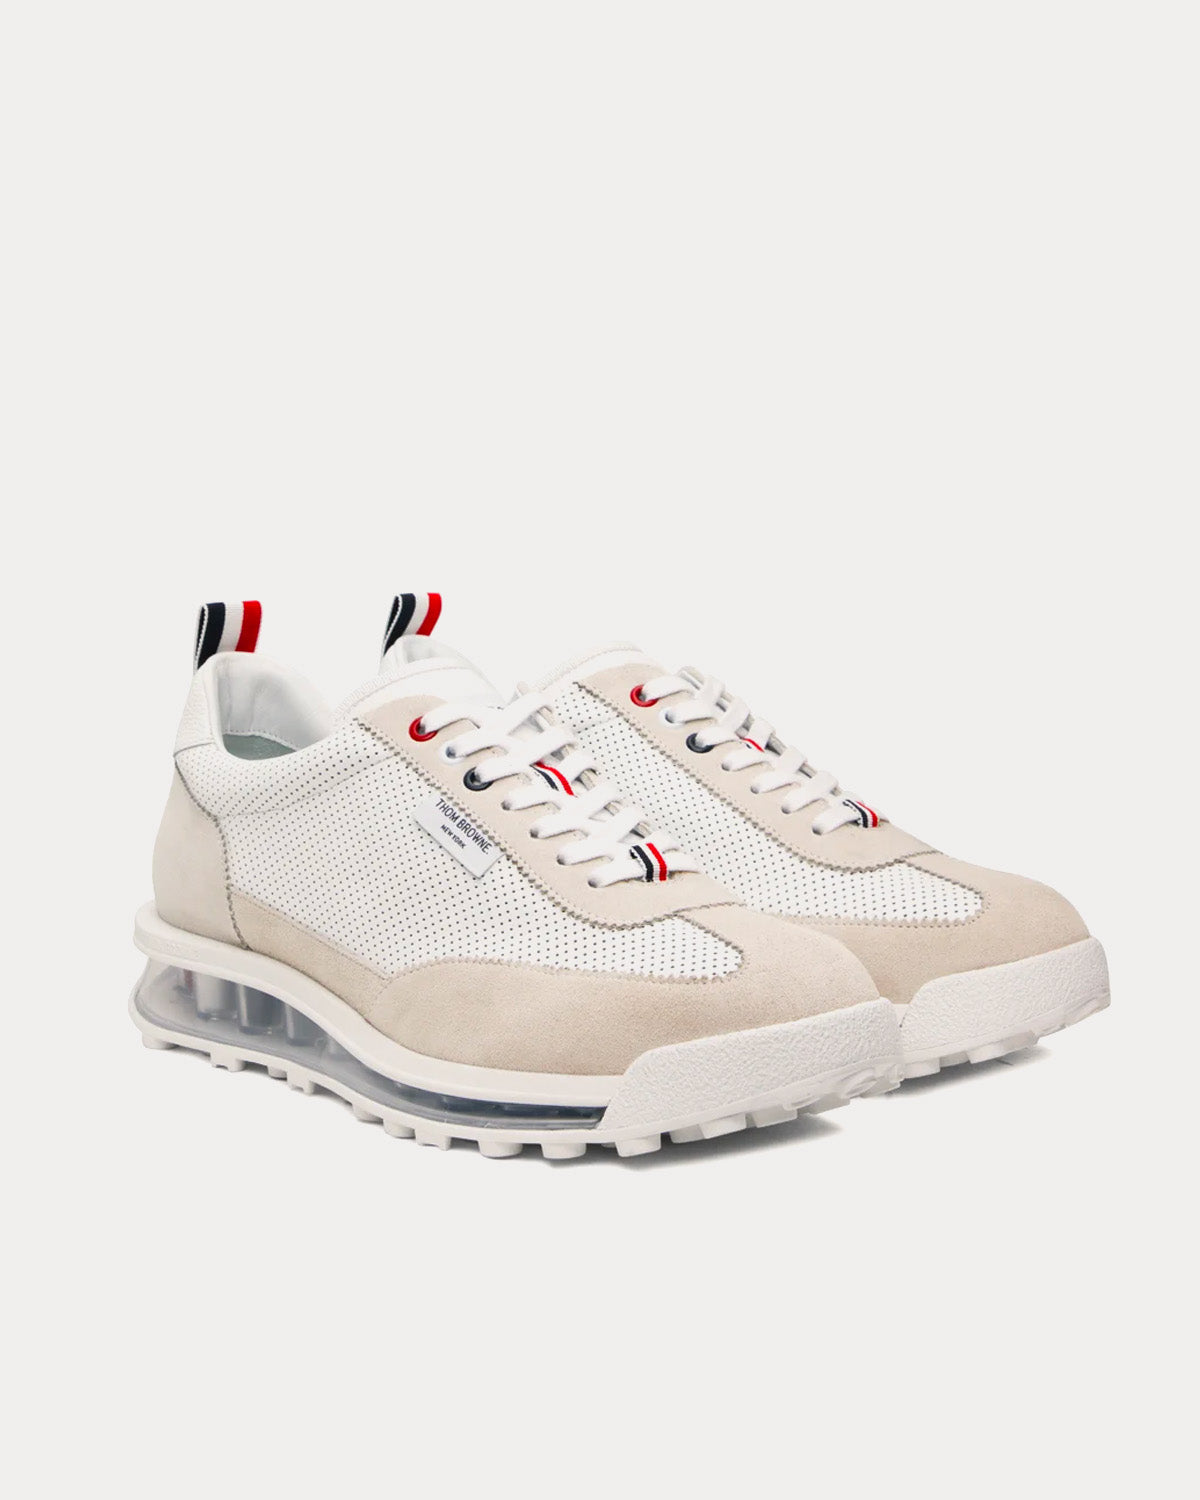 Thom Browne - Tech Runner Clear Sole White / Beige Low Top Sneakers